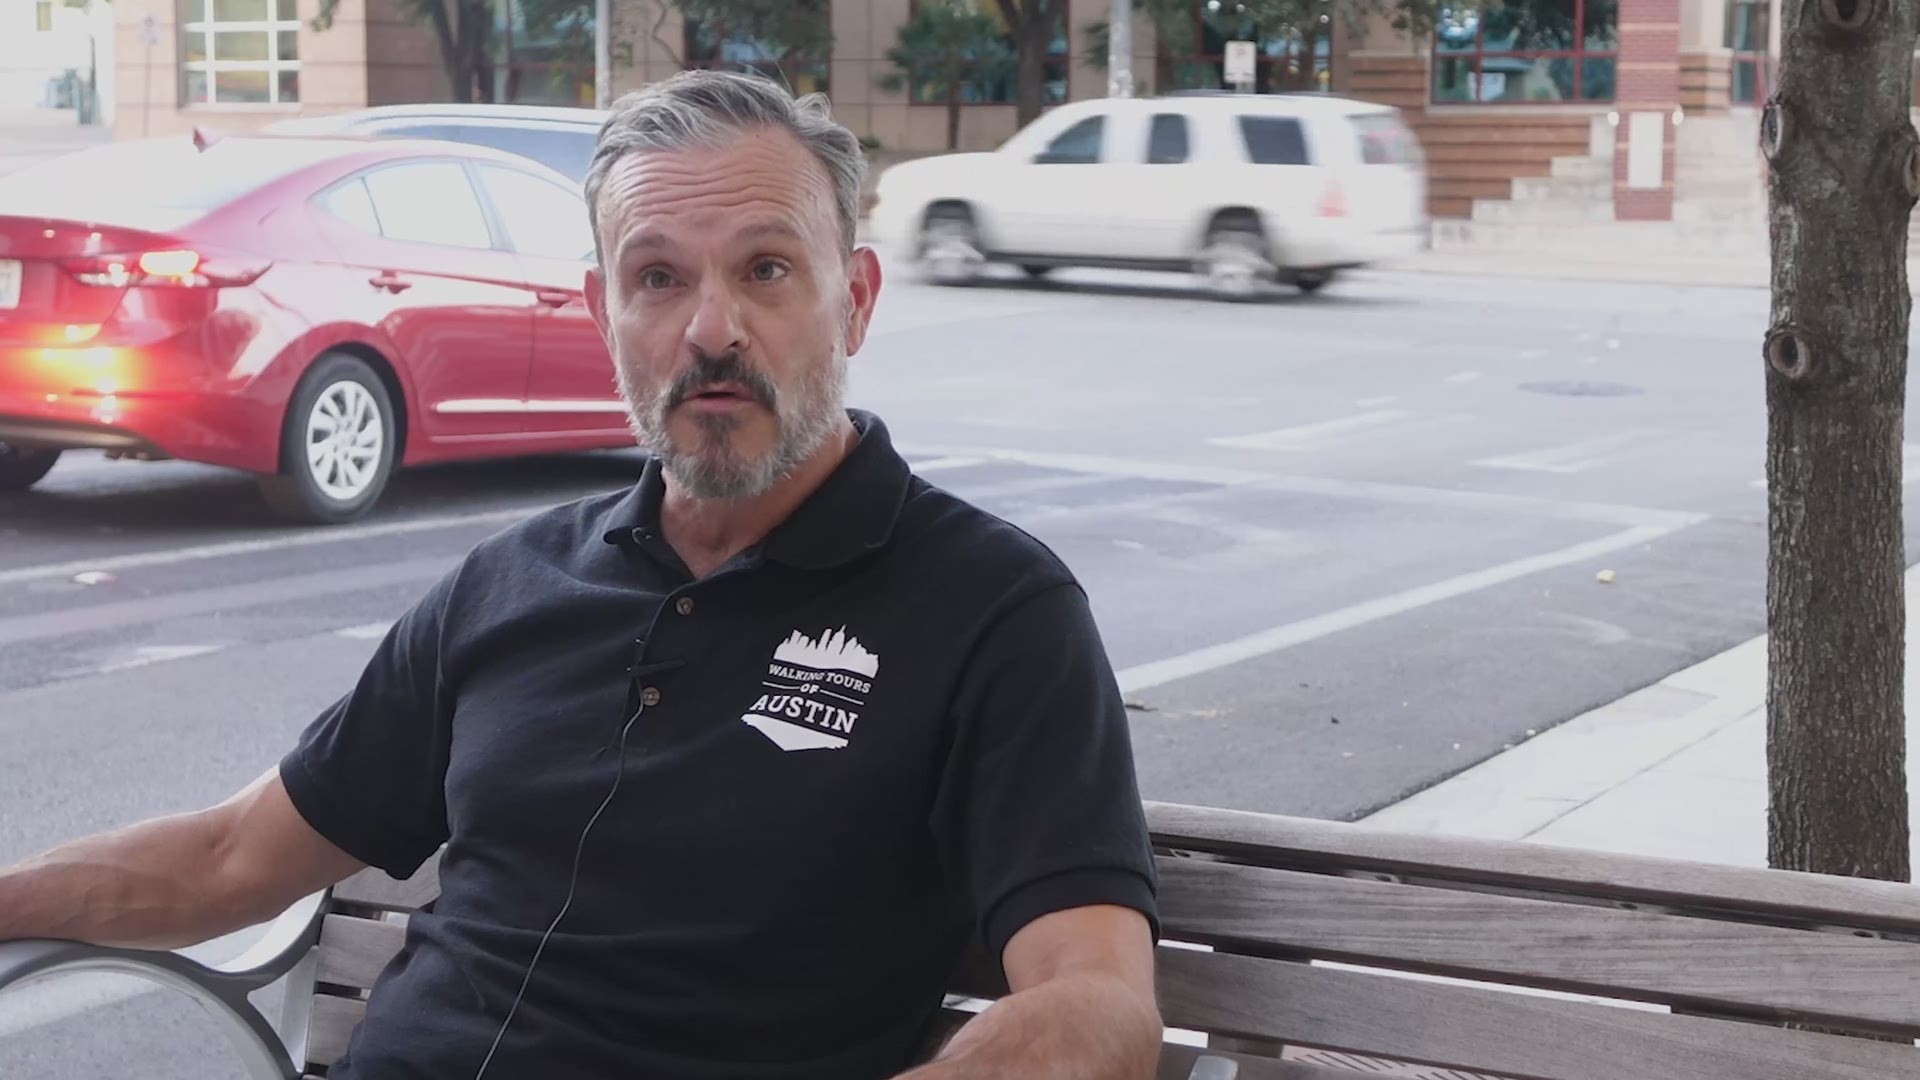 We asked Jim Miles, the owner and operator of Walking Tours of Austin, about Austin's 1885 serial killer and why people should go on his "Murder Walk Austin" tour.